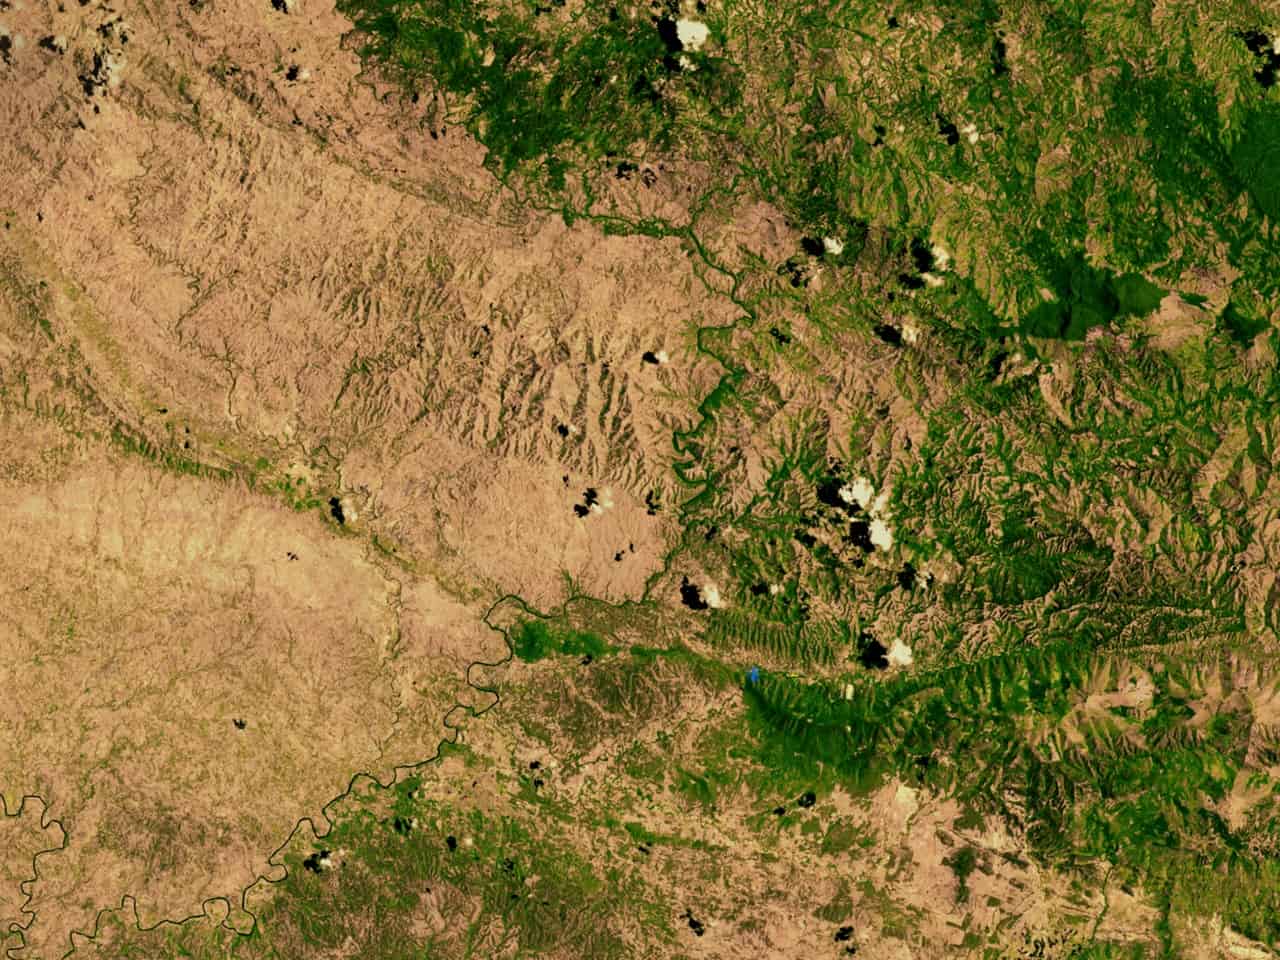 The boundary between Haiti and the Dominican Republic as seen from space.